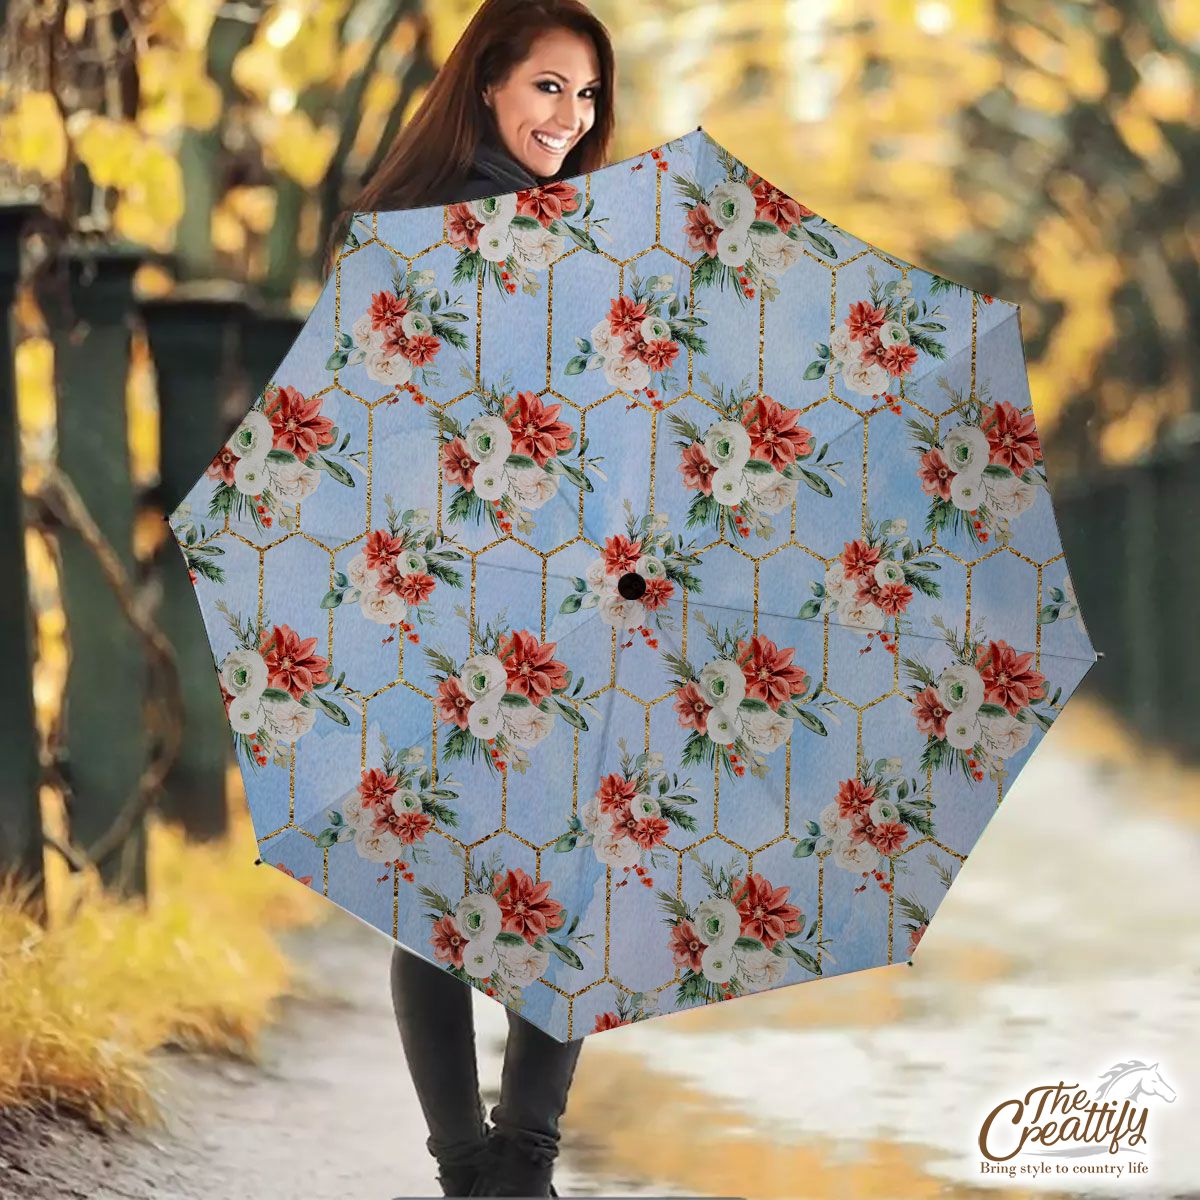 Rose Flower With Christmas Tree Branch And Mistletoe Seamless Pattern Umbrella